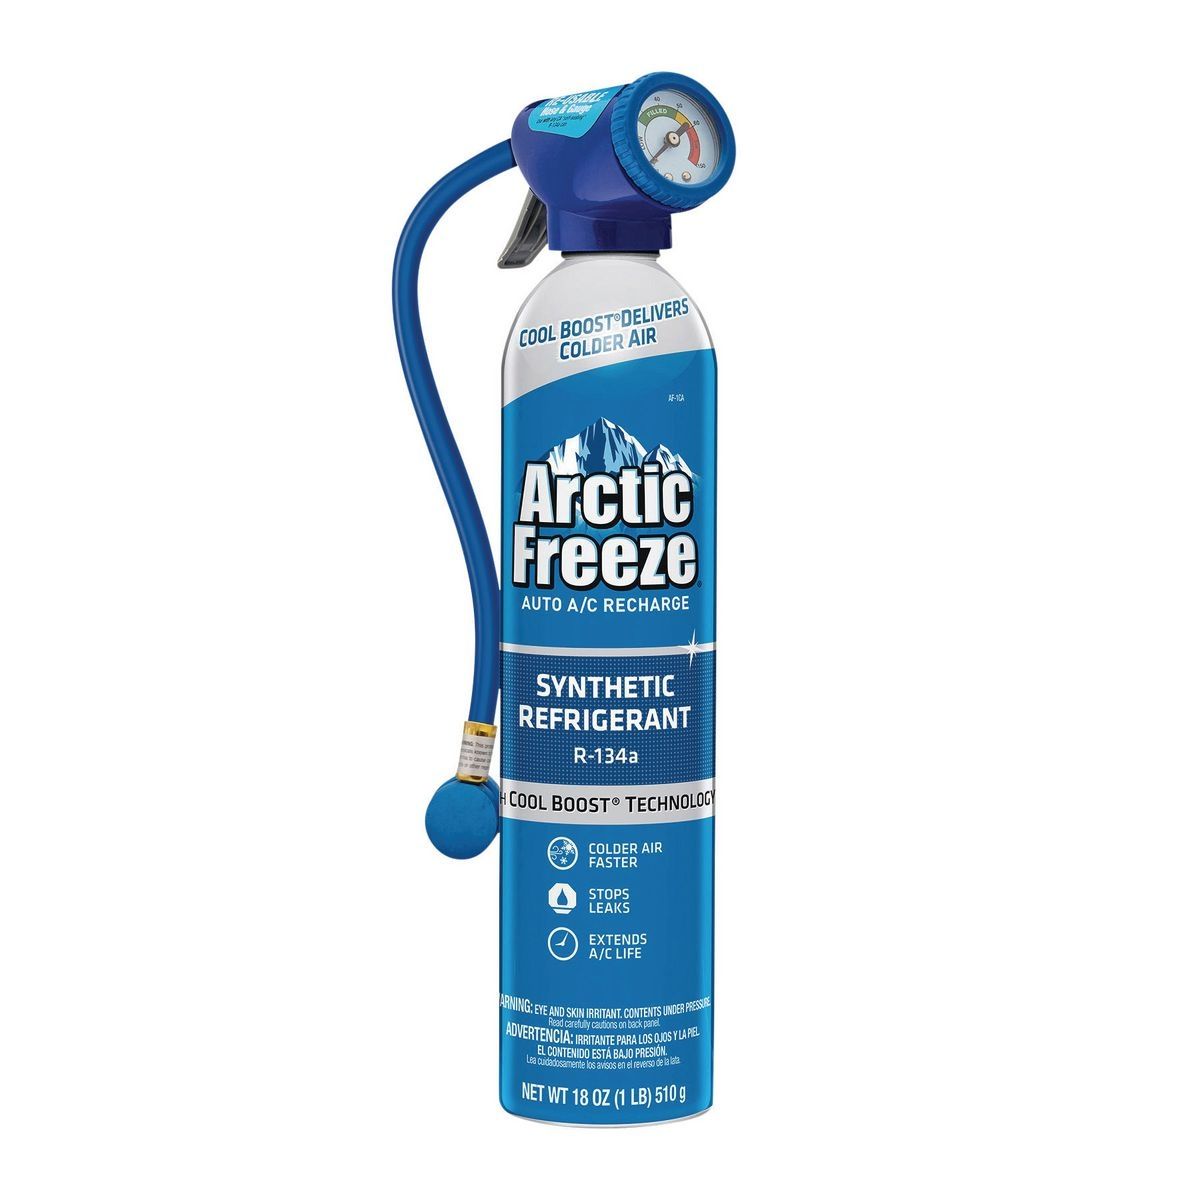 ARCTIC FREEZE 18 oz. Refrigerant with Dispenser and Gauge - CARB Certified